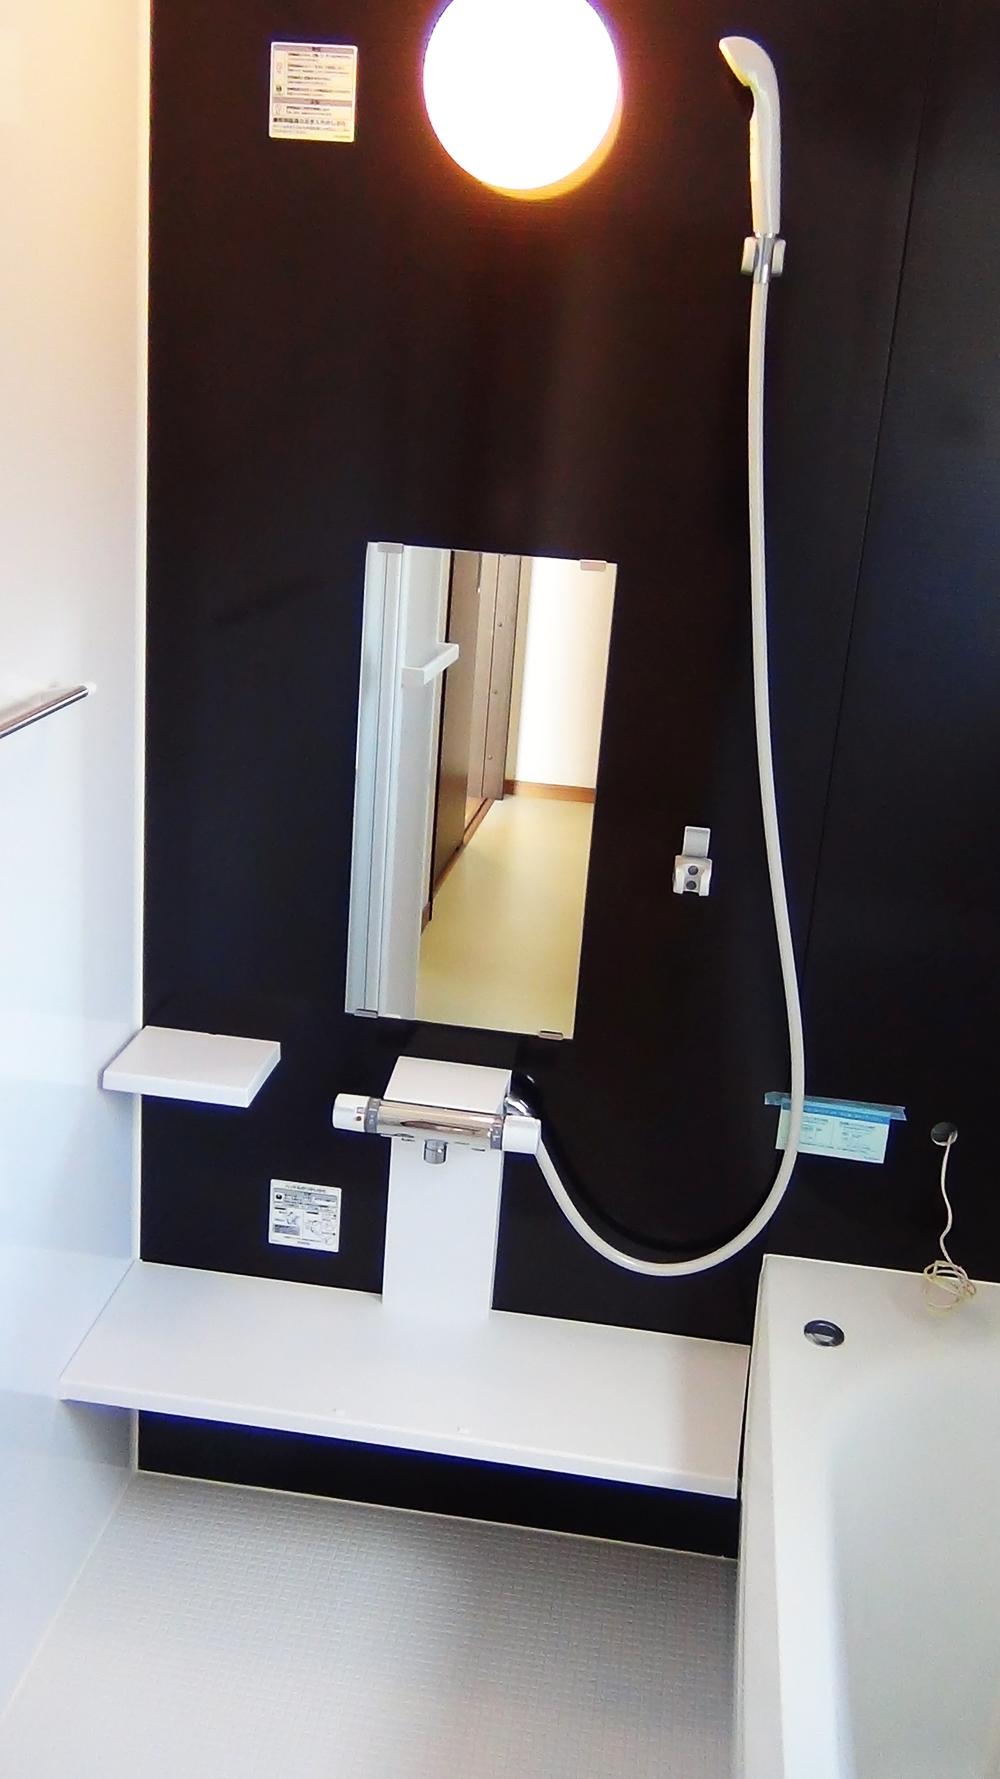 Same specifications photo (bathroom). The series, Other property is a picture. Reference Image